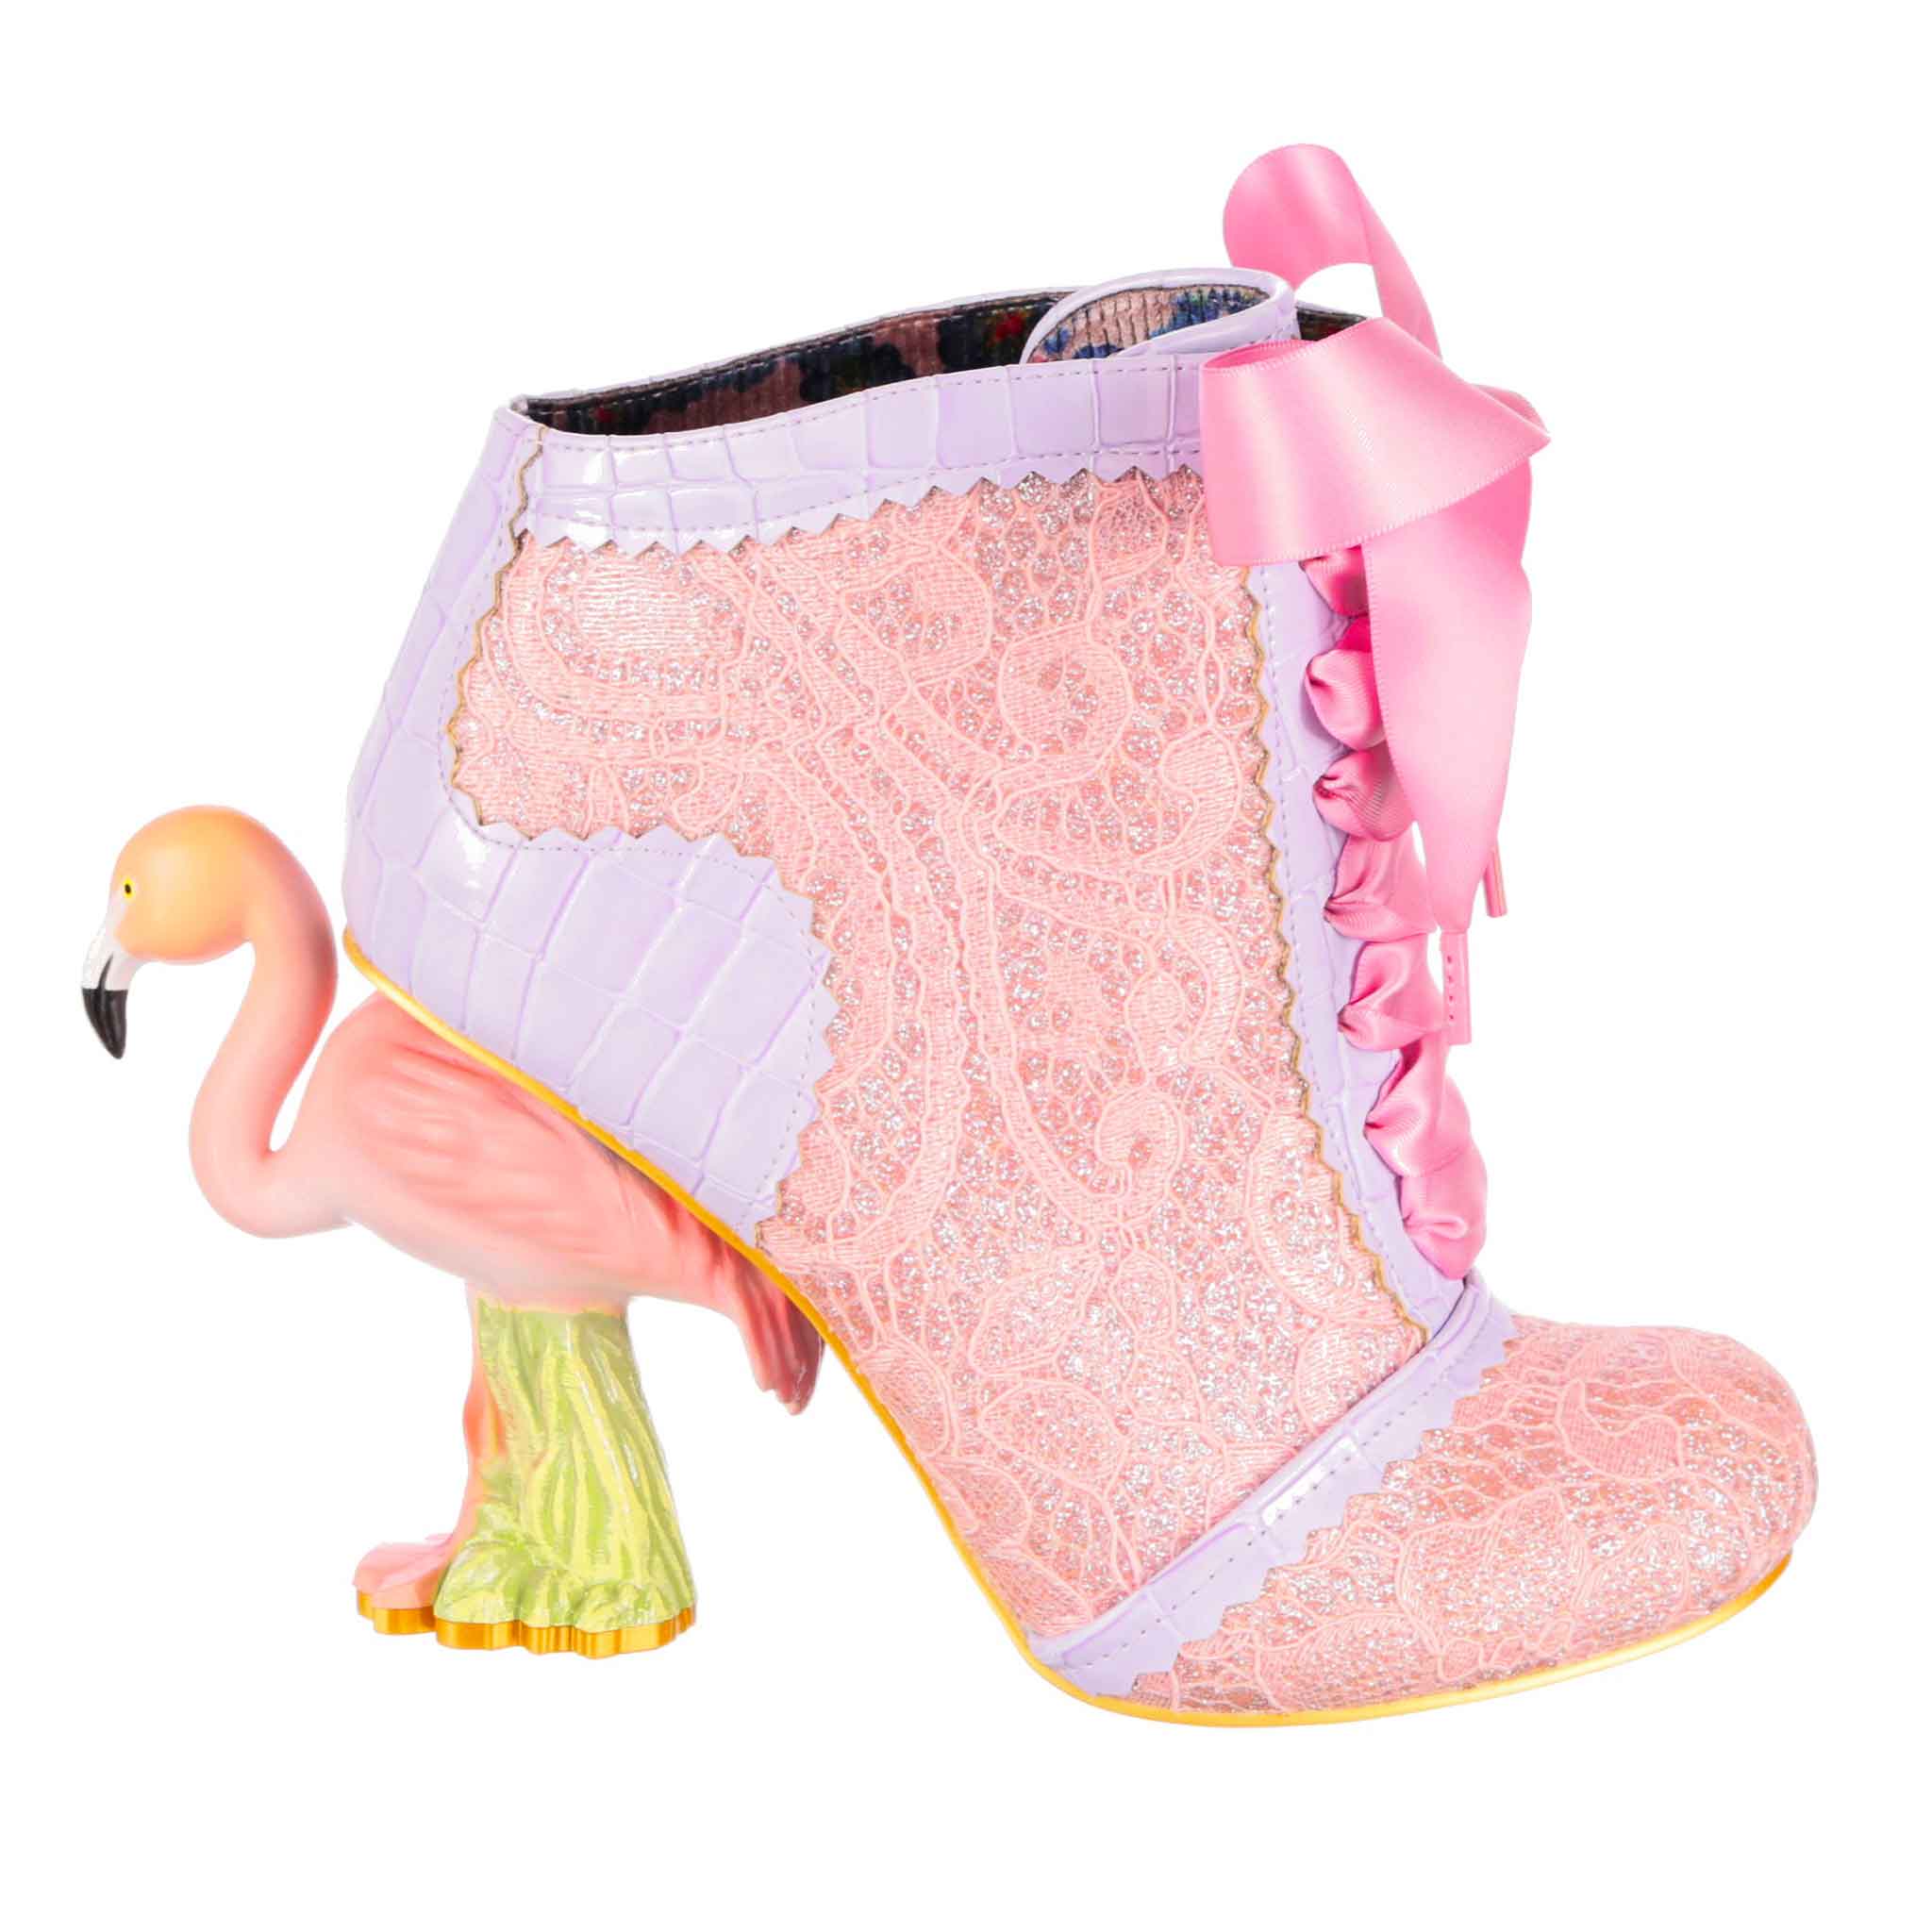 Irregular Choice - Original Footwear to Stand Out From the